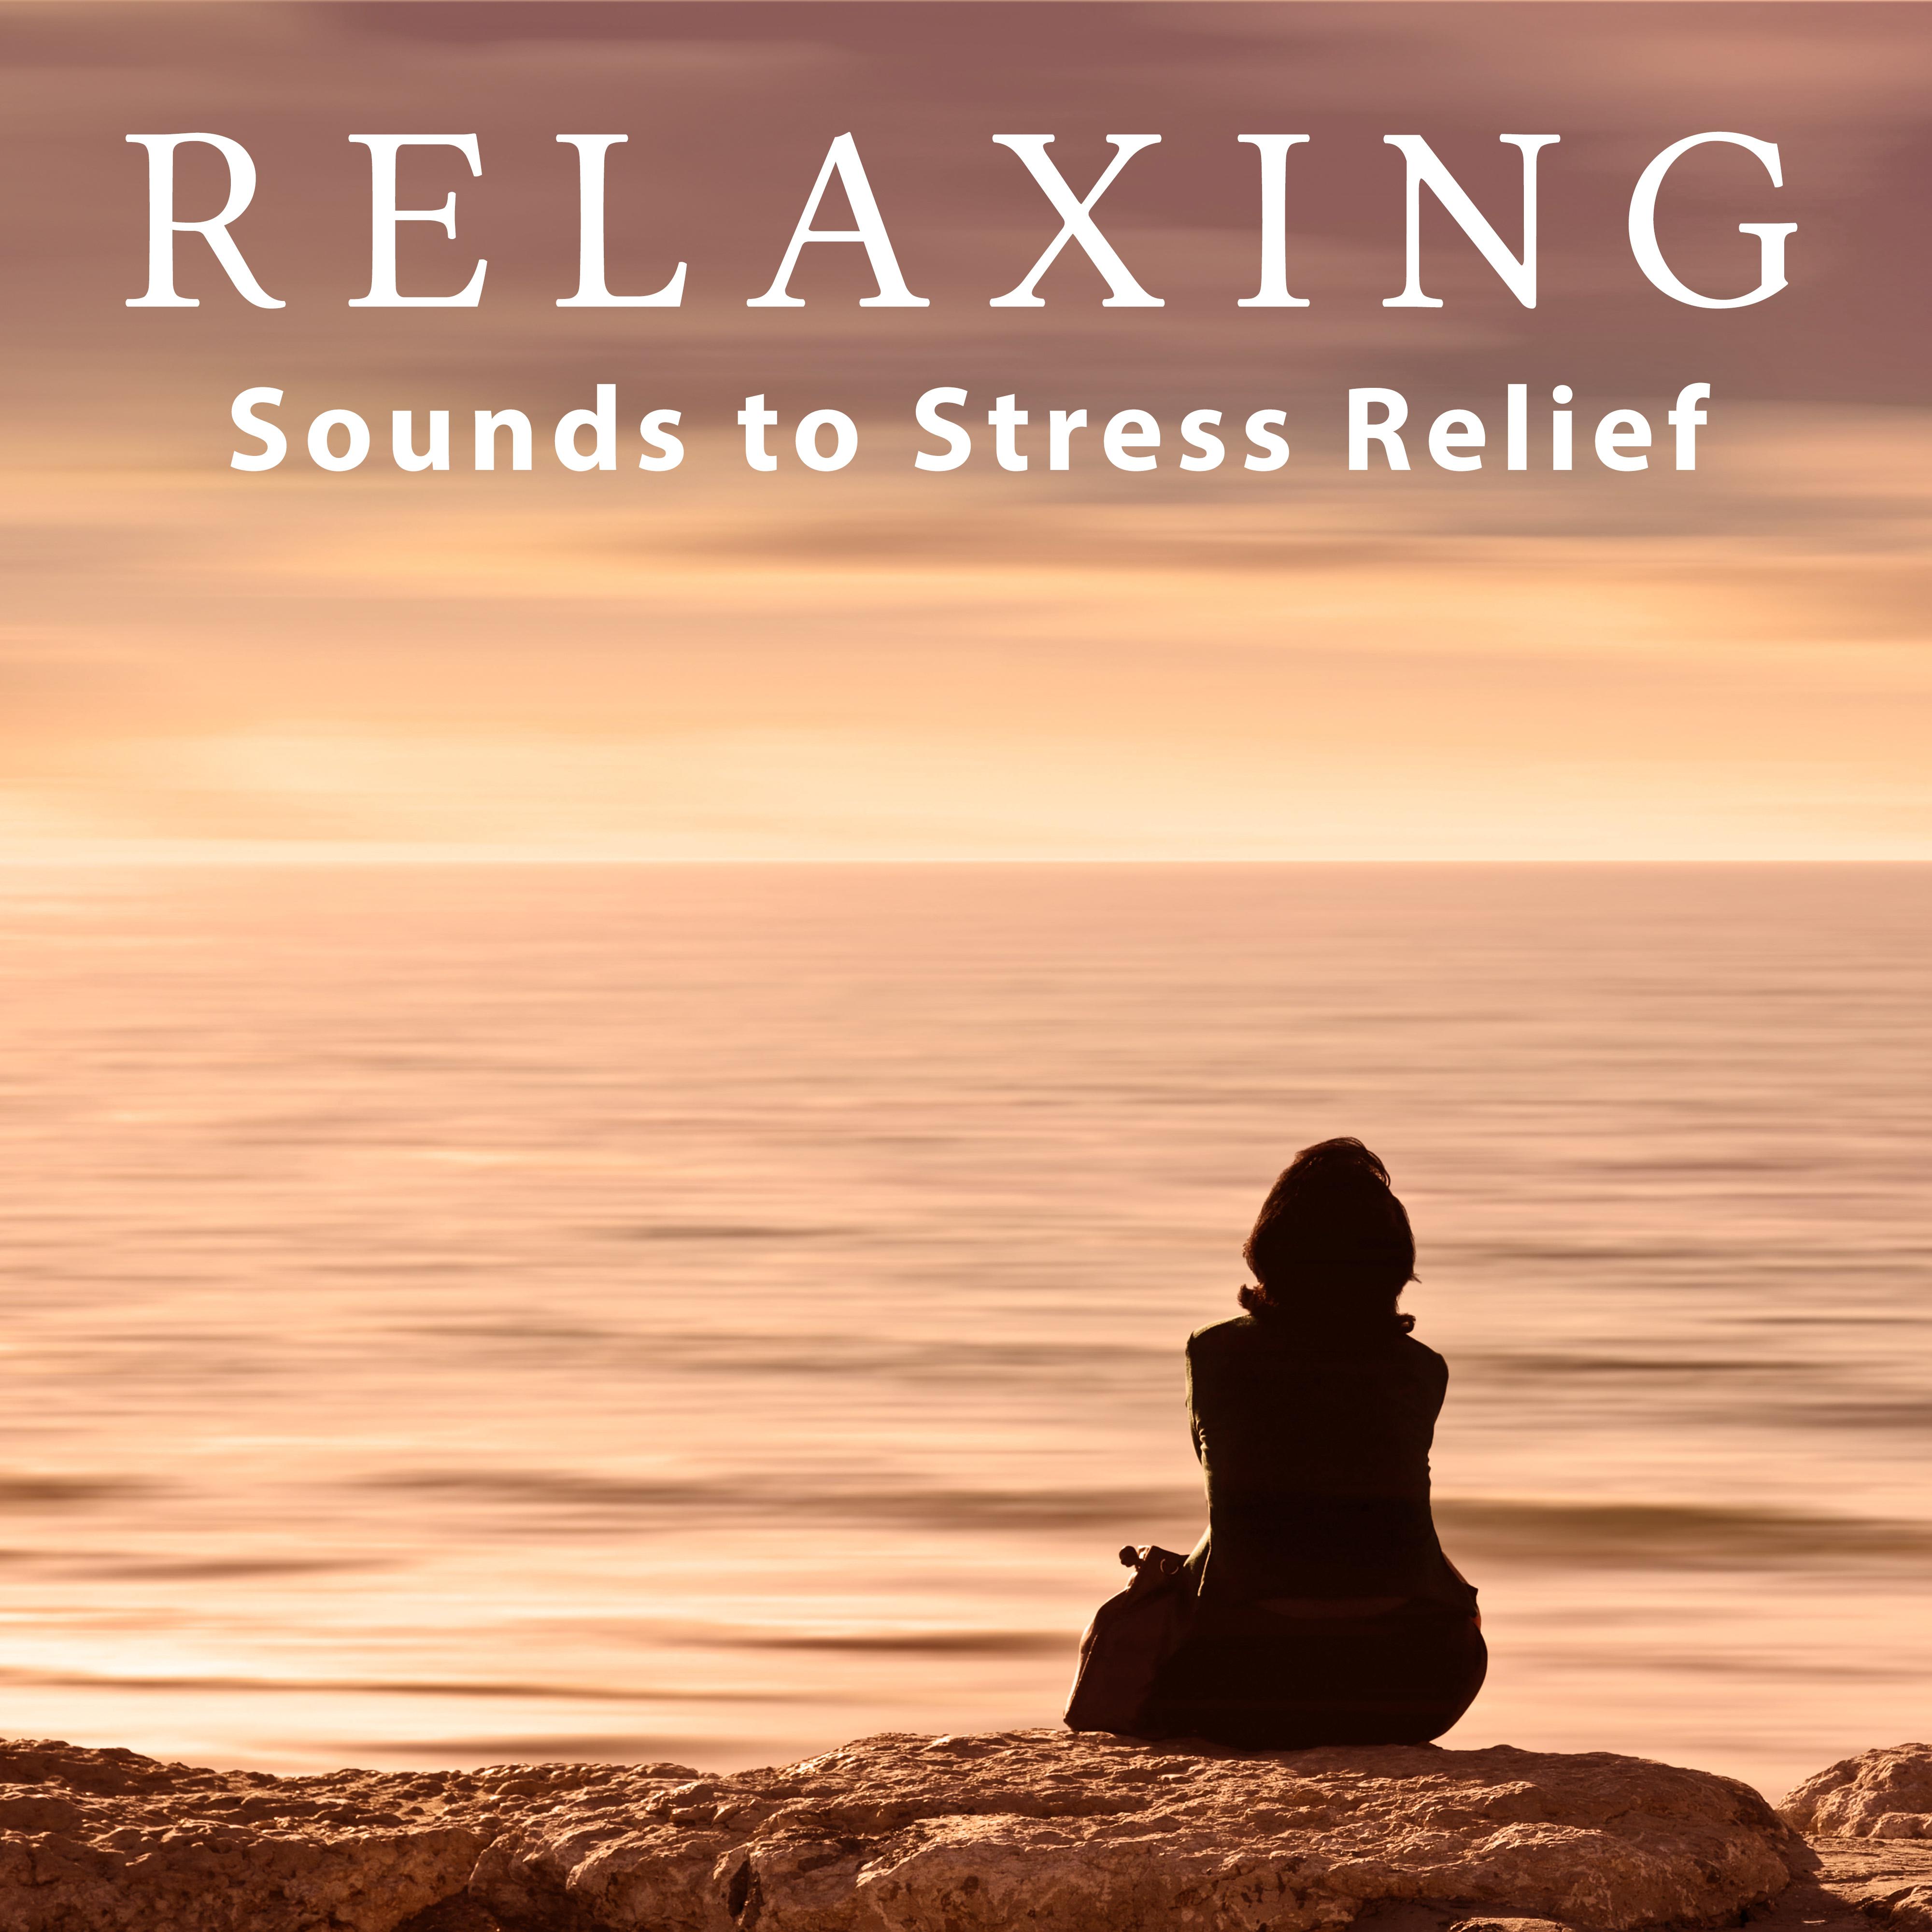 Relaxing Sounds to Stress Relief – Chilled Music, New Age Relaxation, Rest a Bit, Spirit Calmness